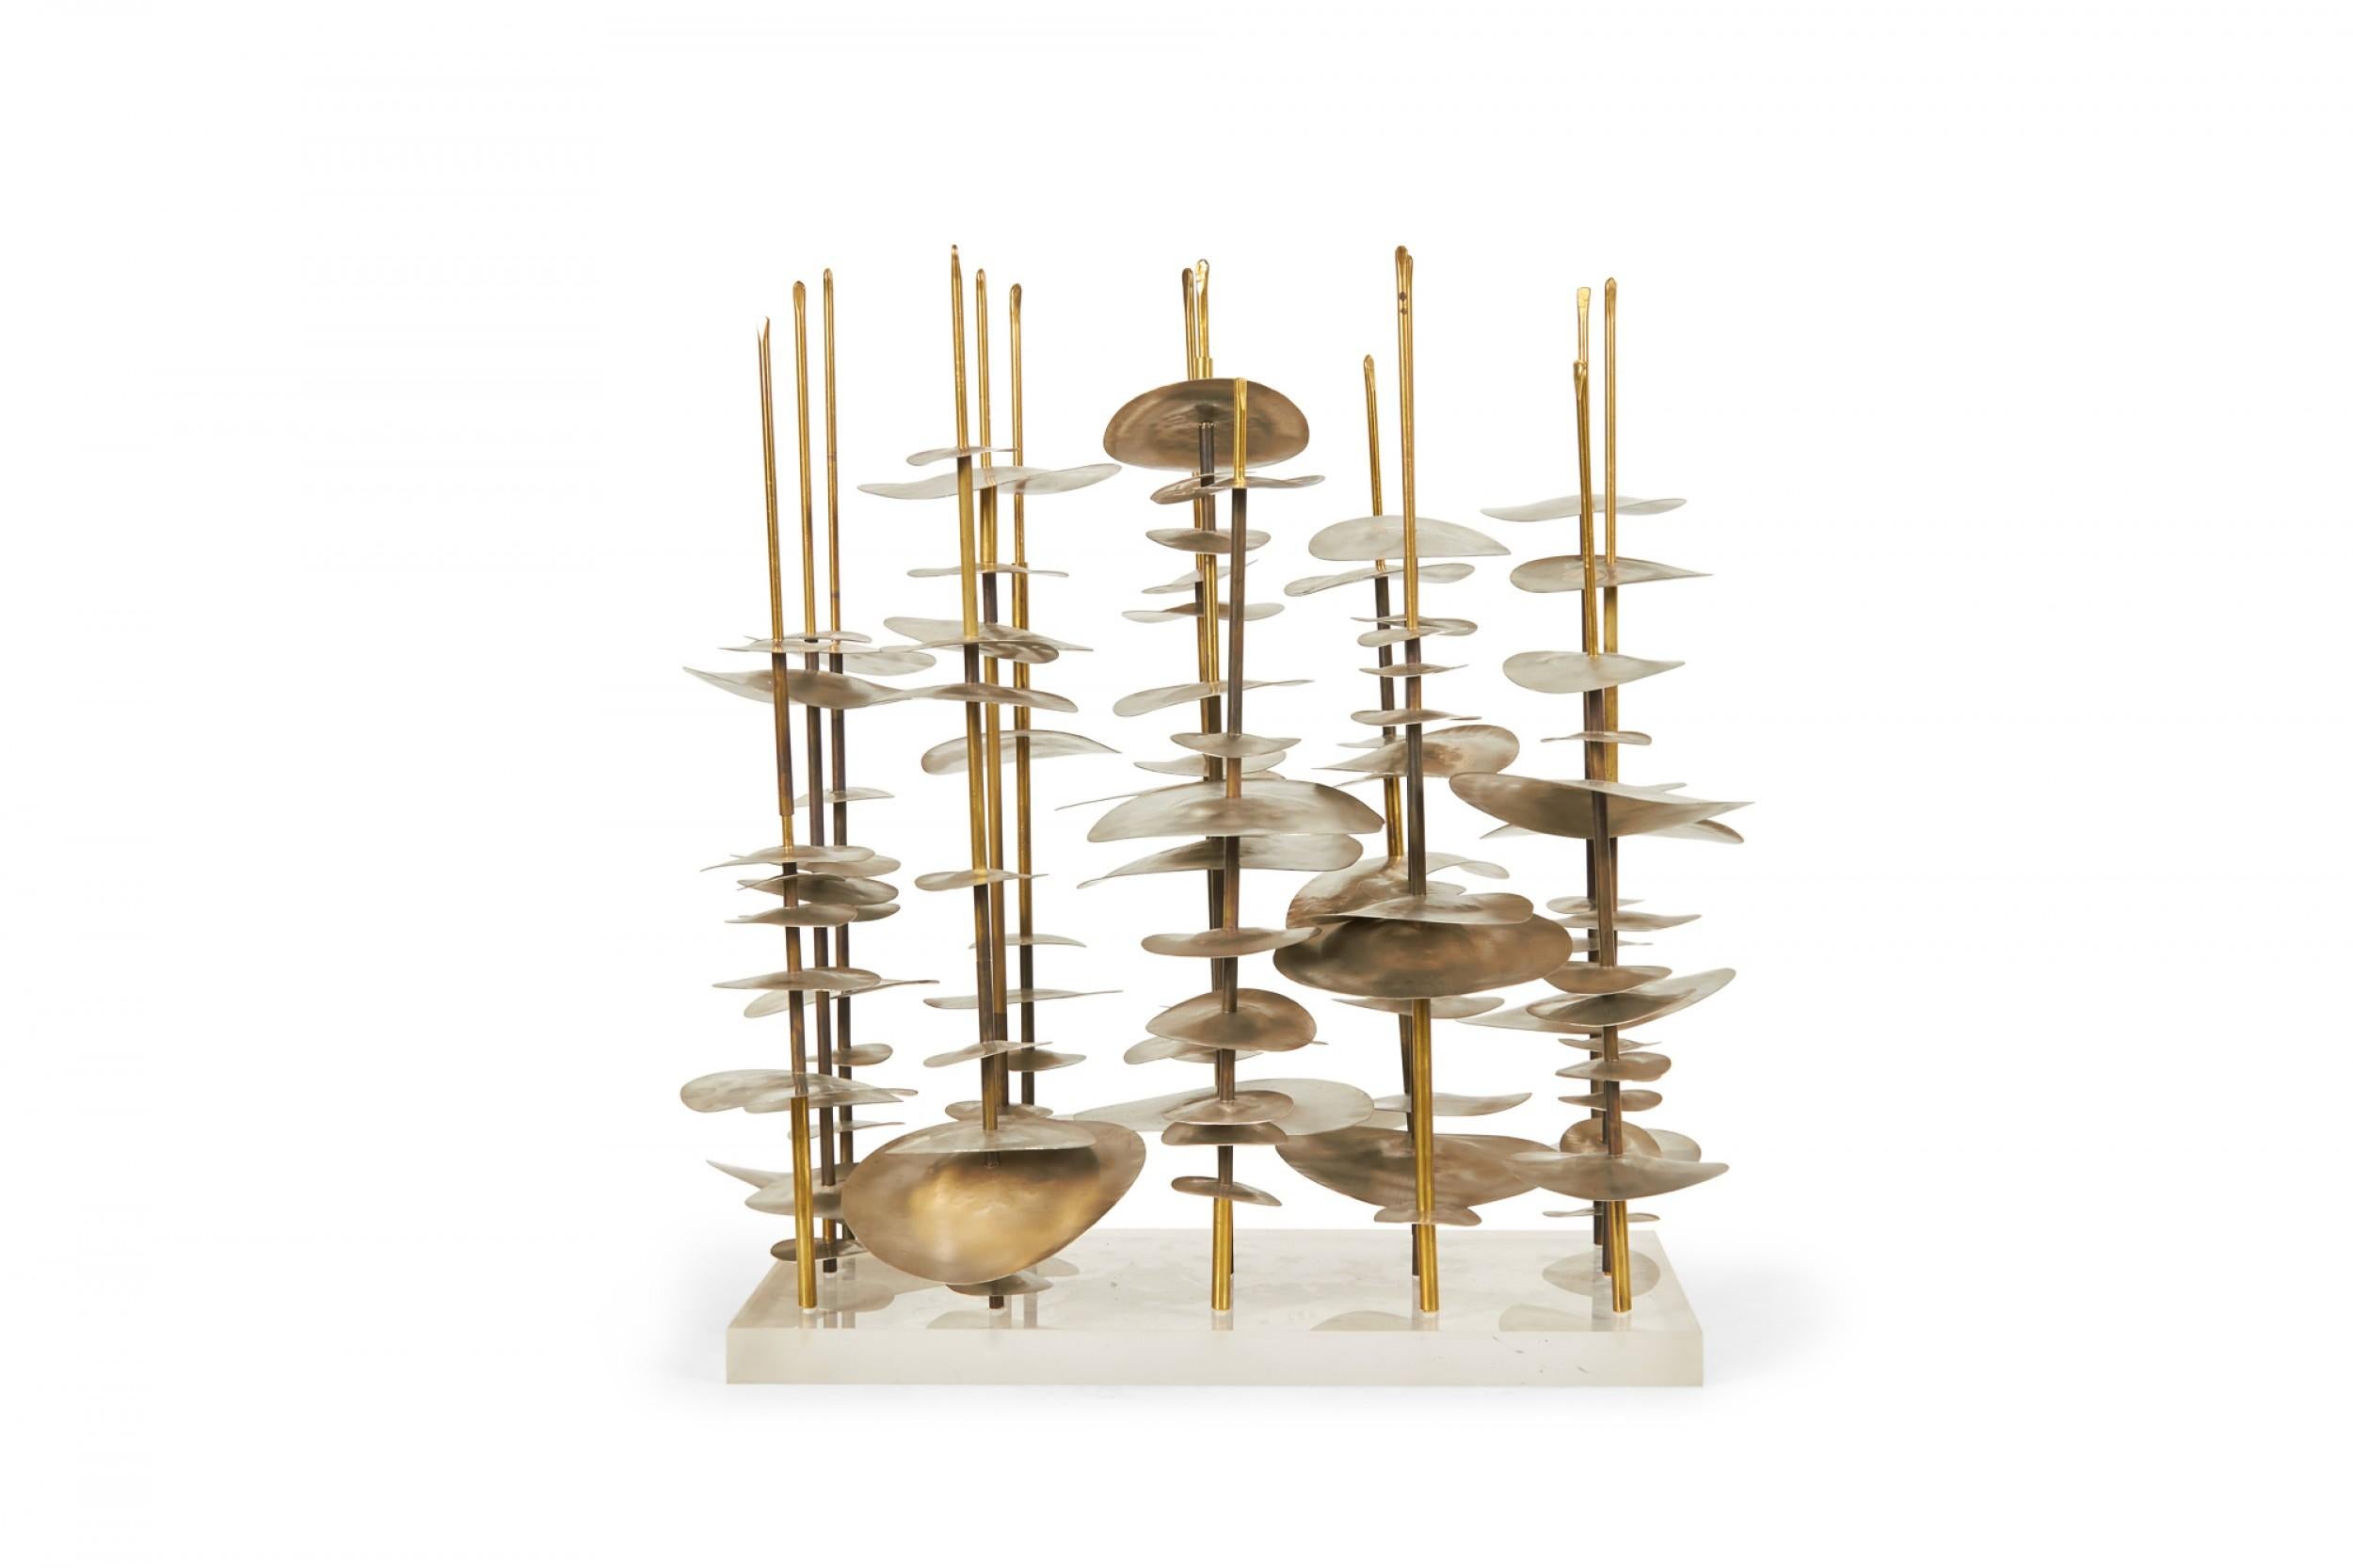 Contemporary Abstract Robert Lee Morris Nickel and Brass Sculpture Mounted on a Lucite Base For Sale